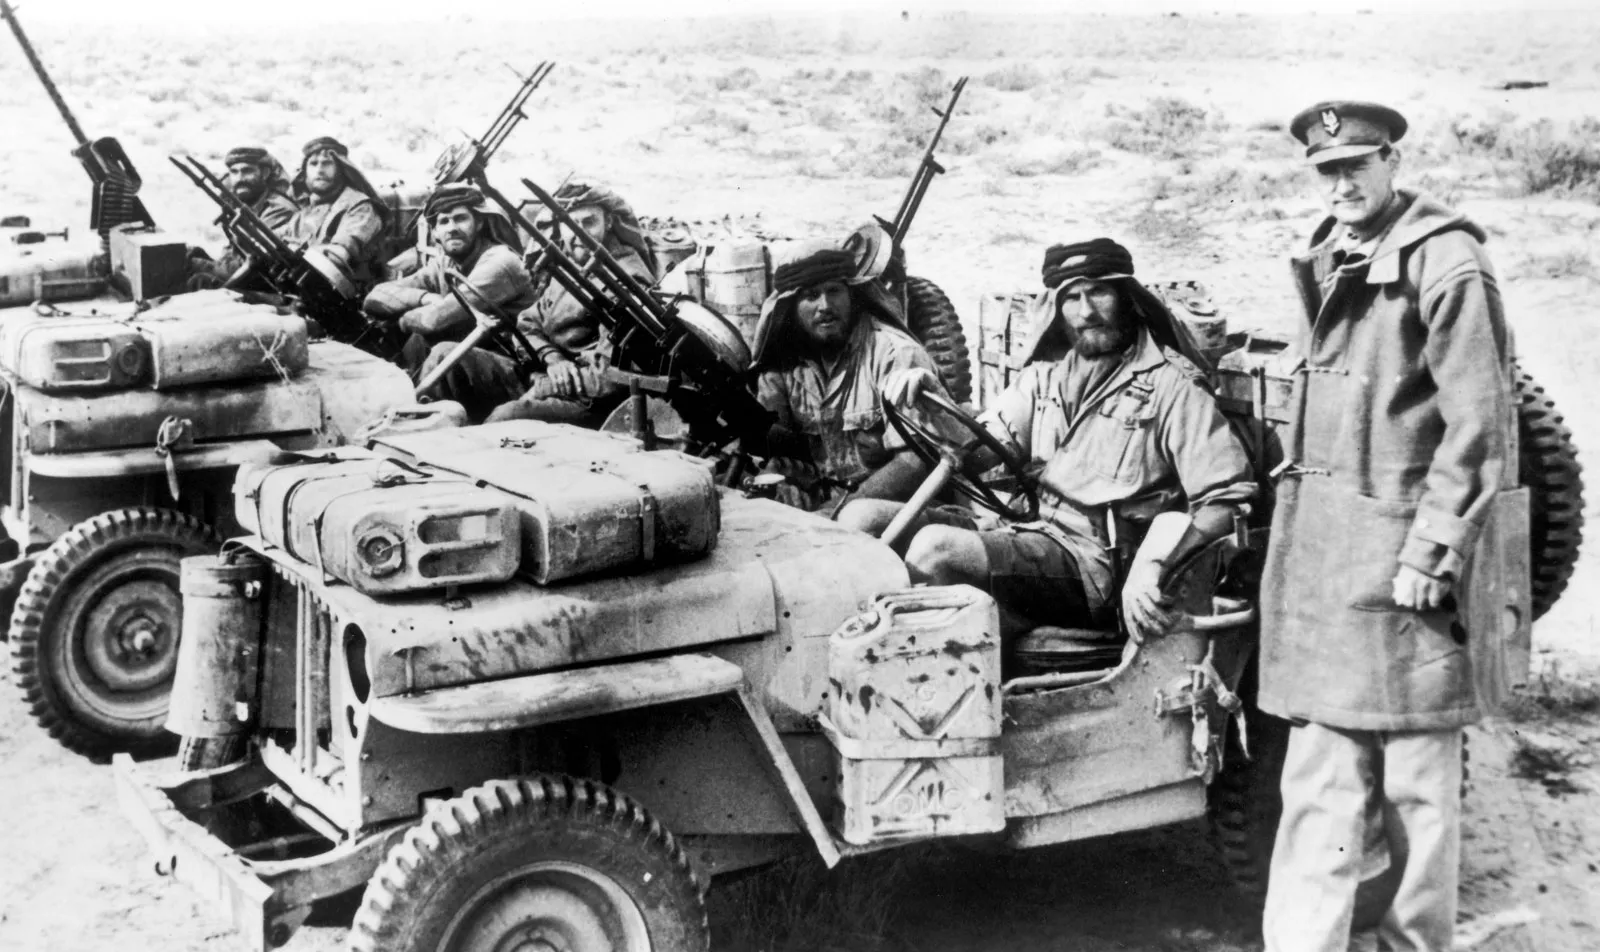 Special Air Service: David Stirling and "The Originals" in Jeeps, North Africa, 1942